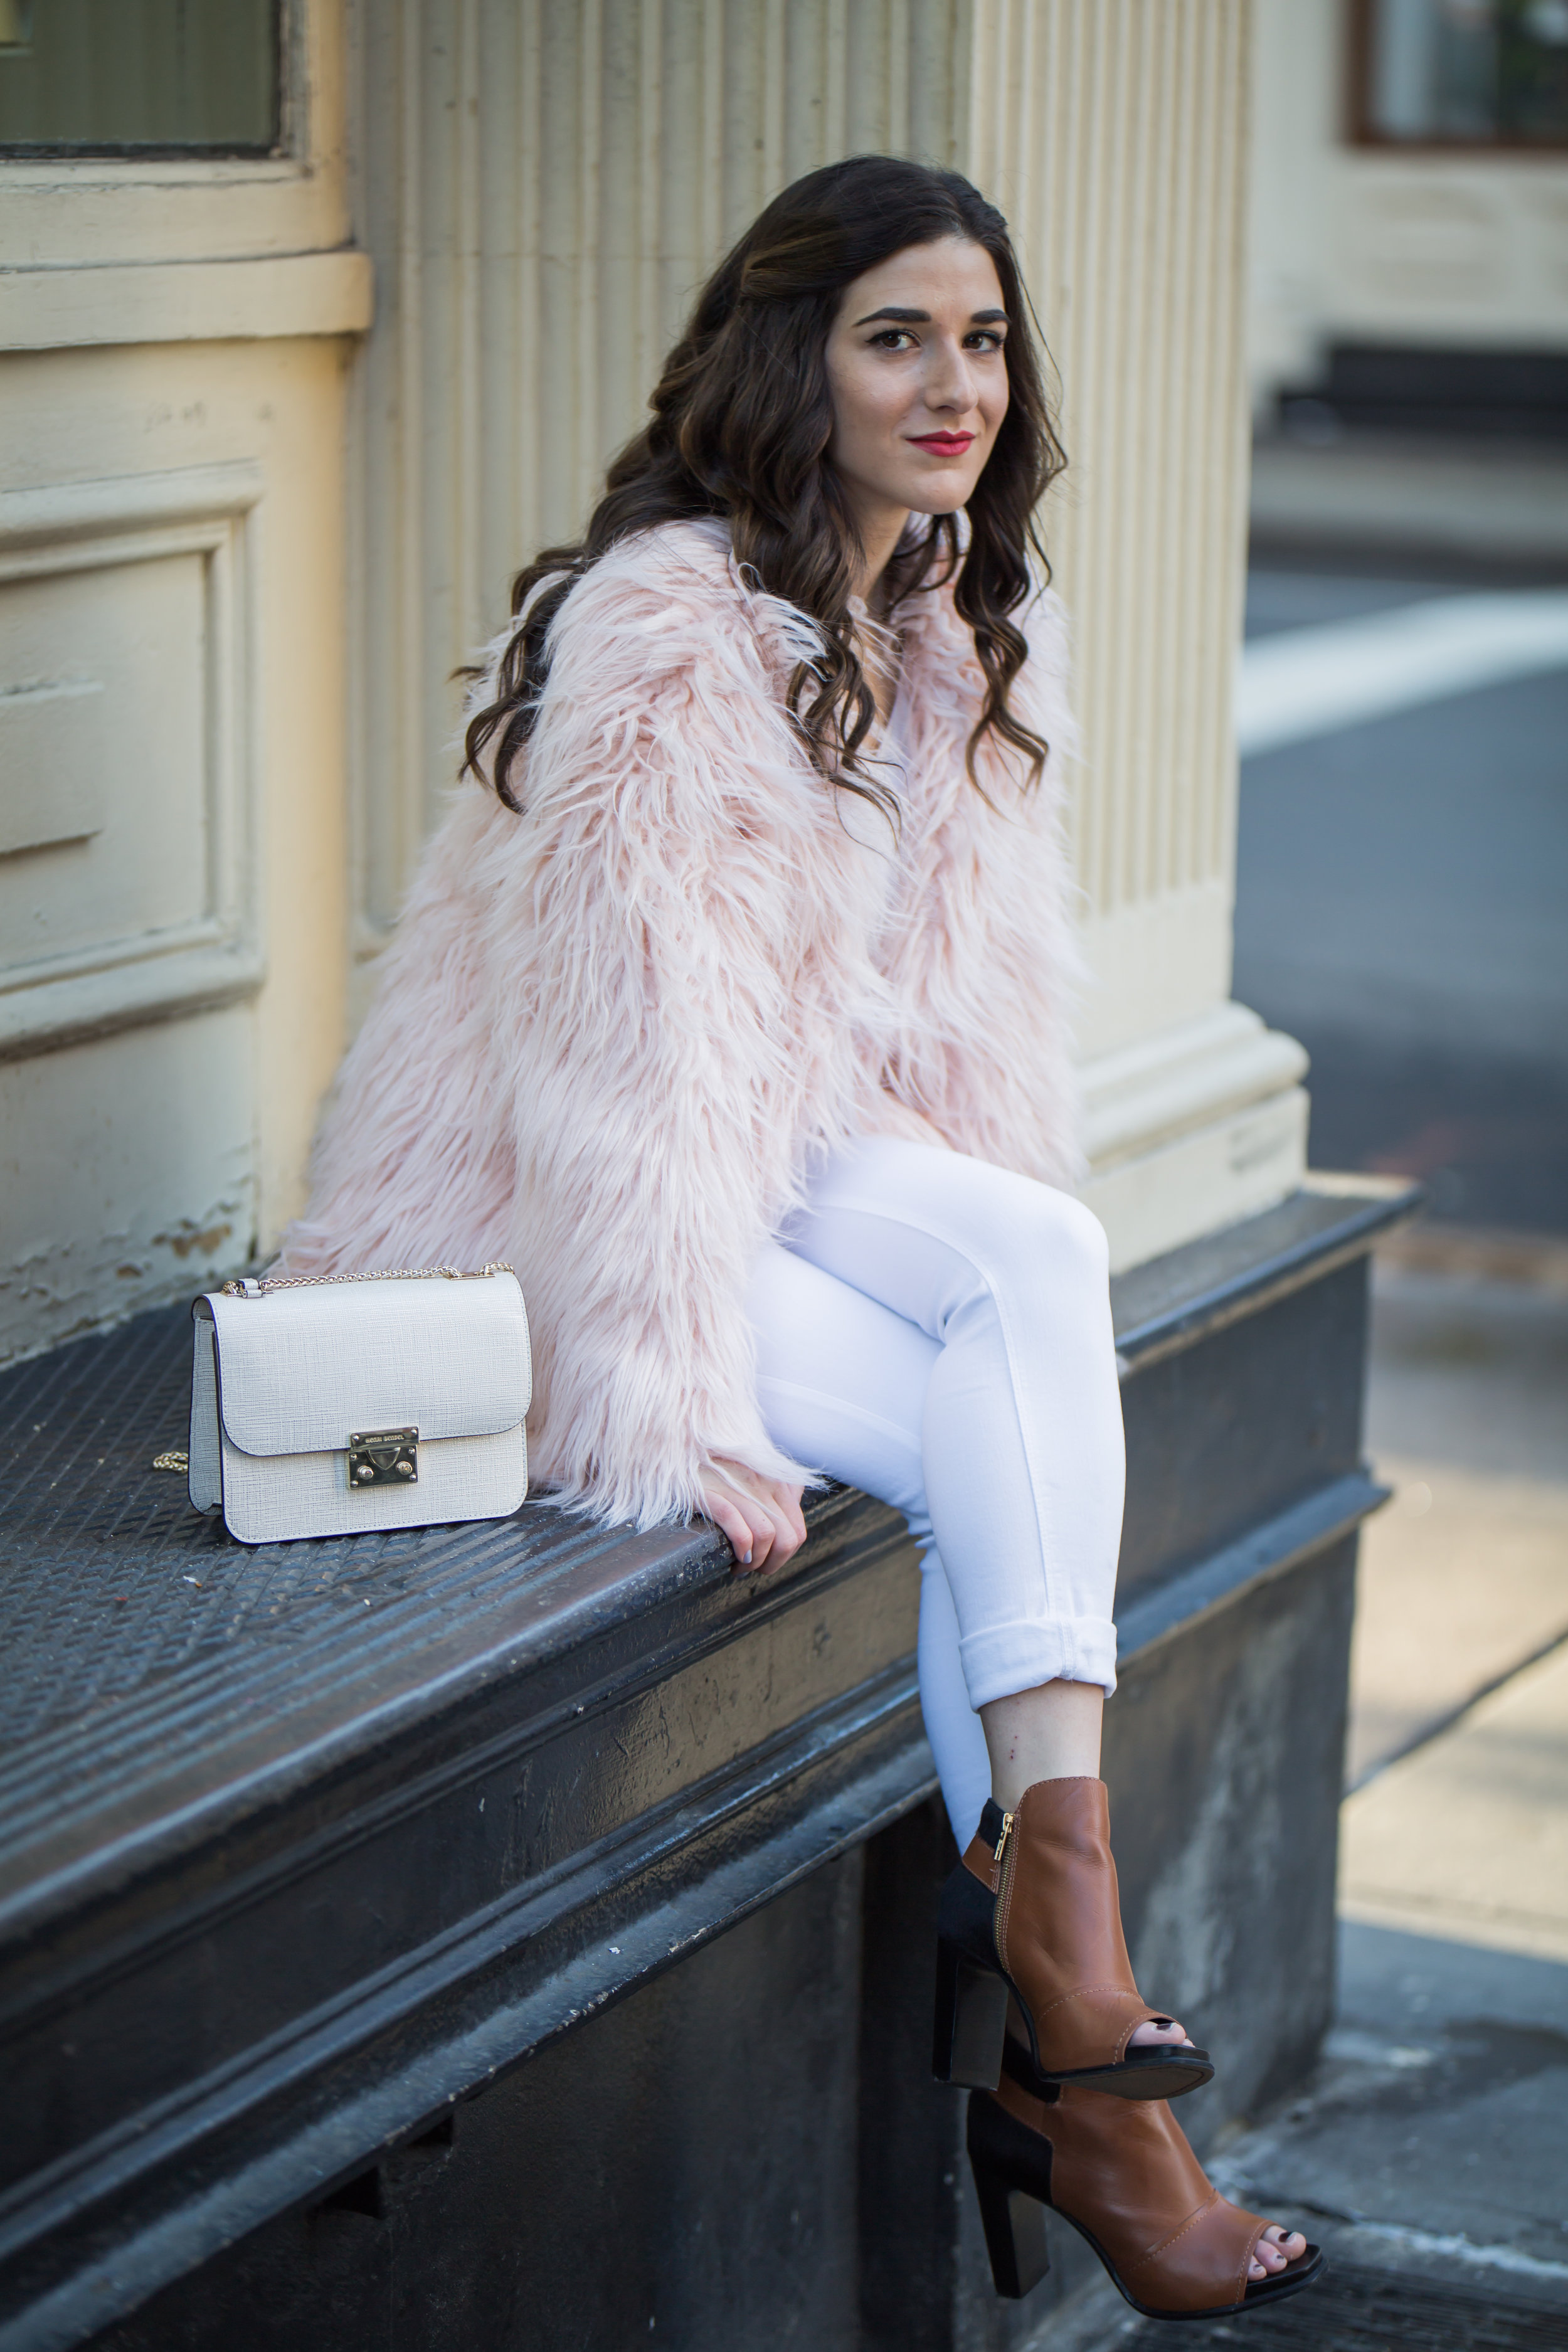 Pink Faux Fur Jacket White Jeans The Best Career Advice Esther Santer Fashion Blog NYC Street Style Blogger Outfit OOTD Trendy Winter Whites Henri Bendel Bag Tan Booties Girl Women Shop Sale Hair What To Wear Wearing Photoshoot Model Accessories Shoes.jpg